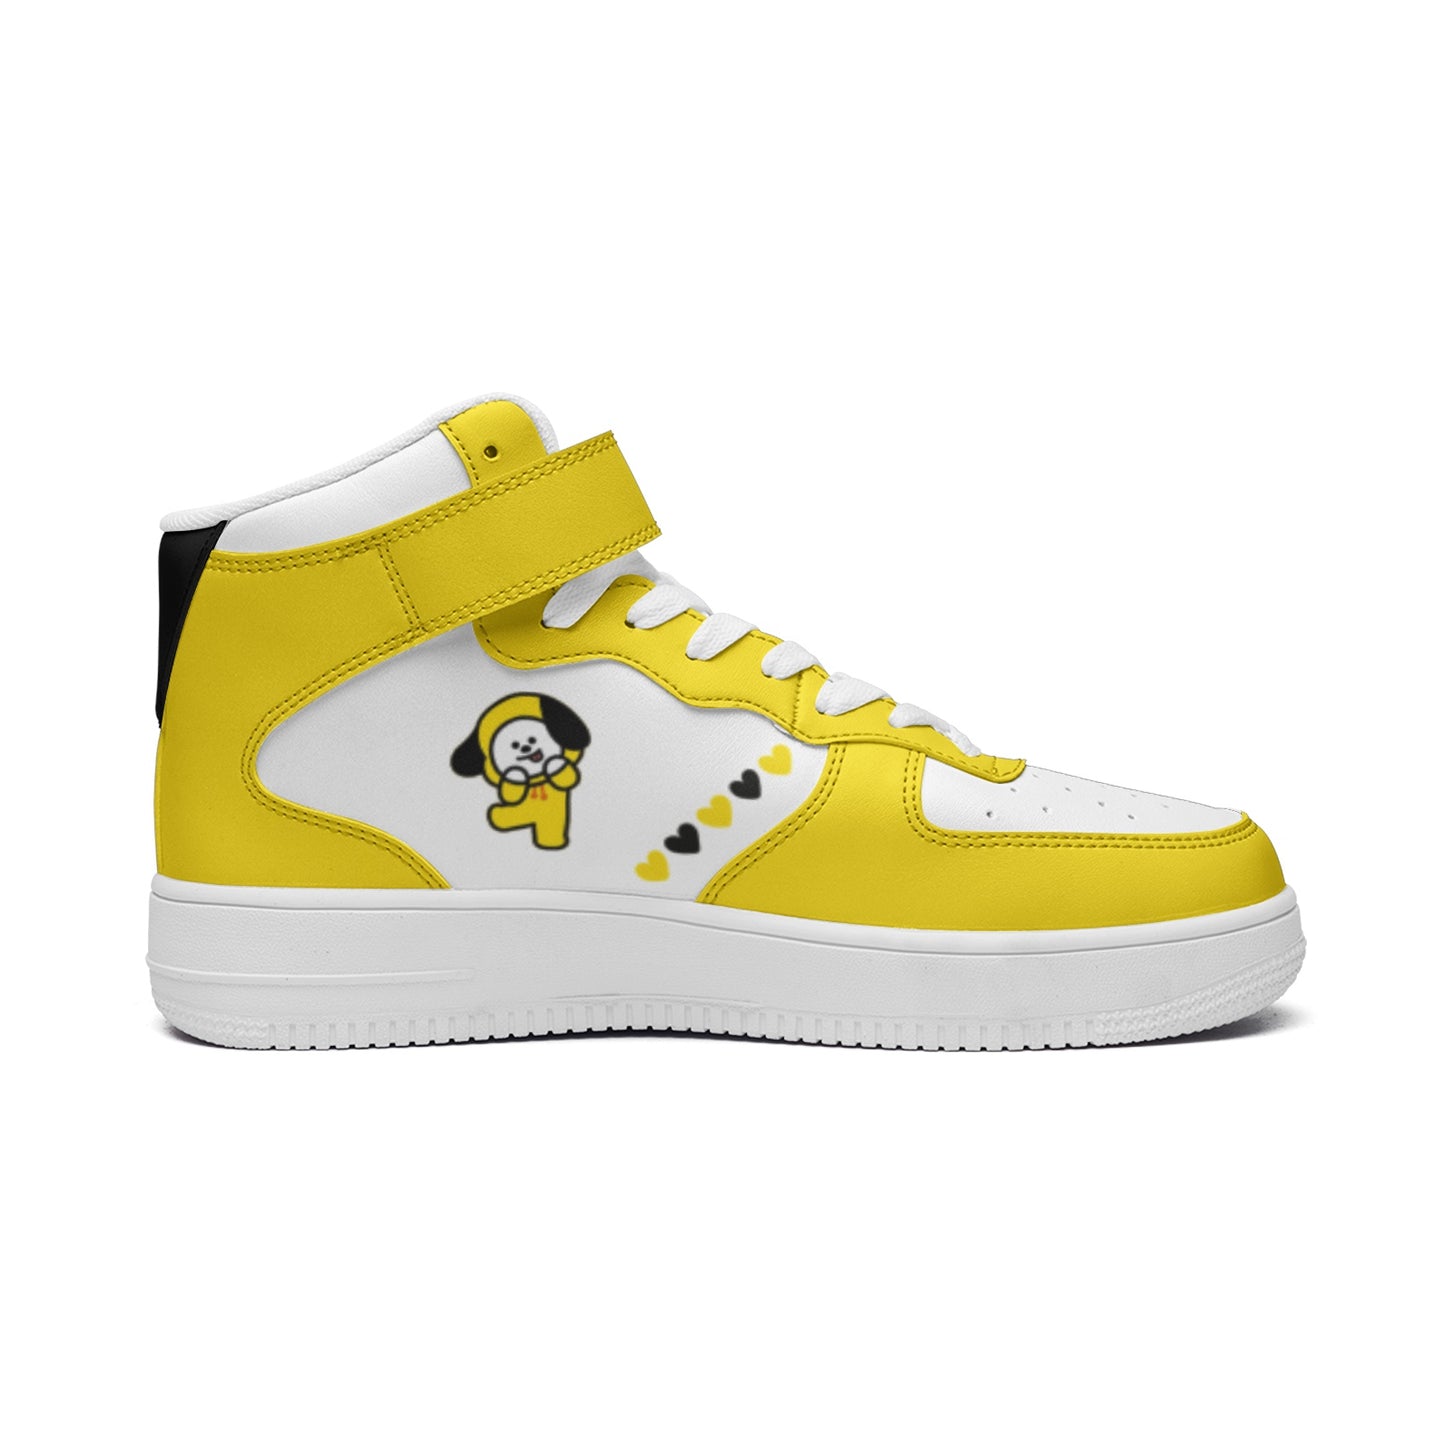 BT21 Chimmy Unisex high Top Leather Sneakers